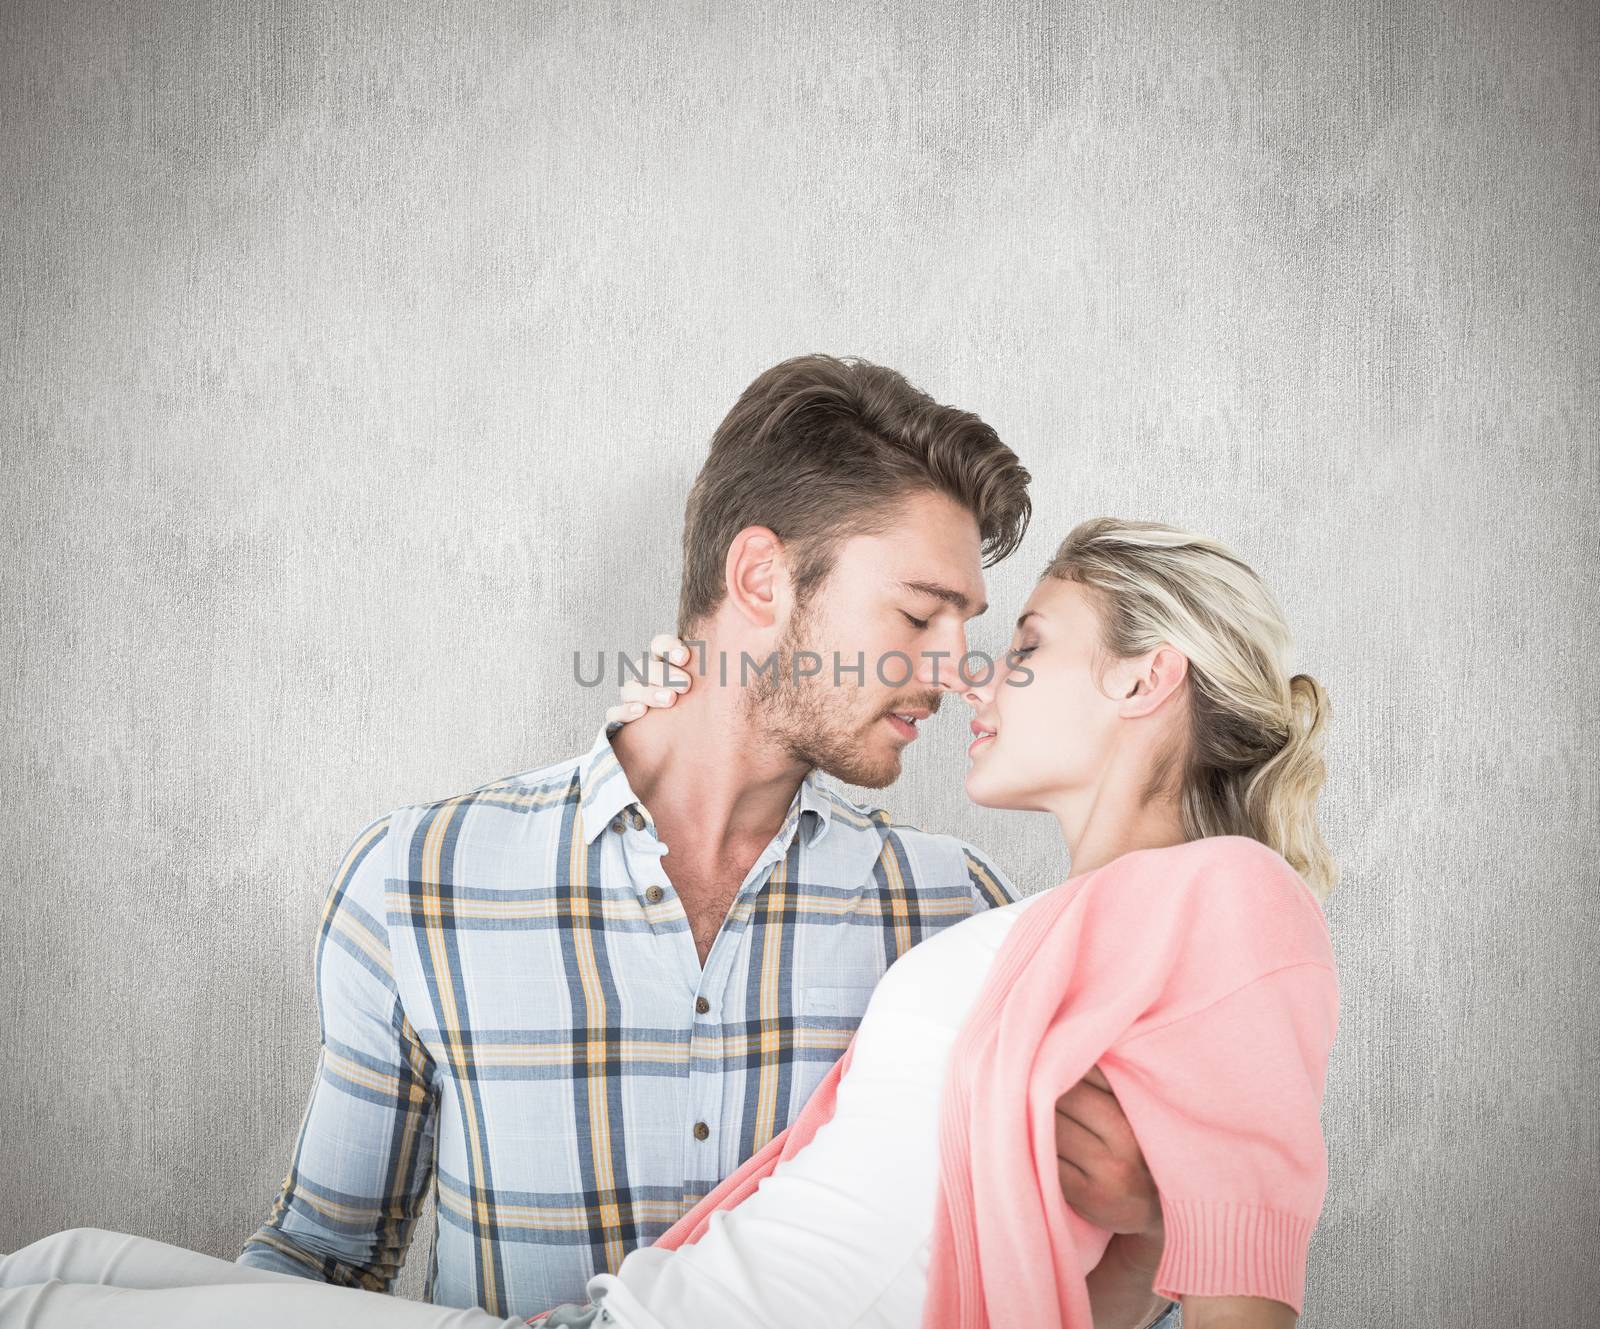 Composite image of handsome man picking up and hugging his girlfriend by Wavebreakmedia